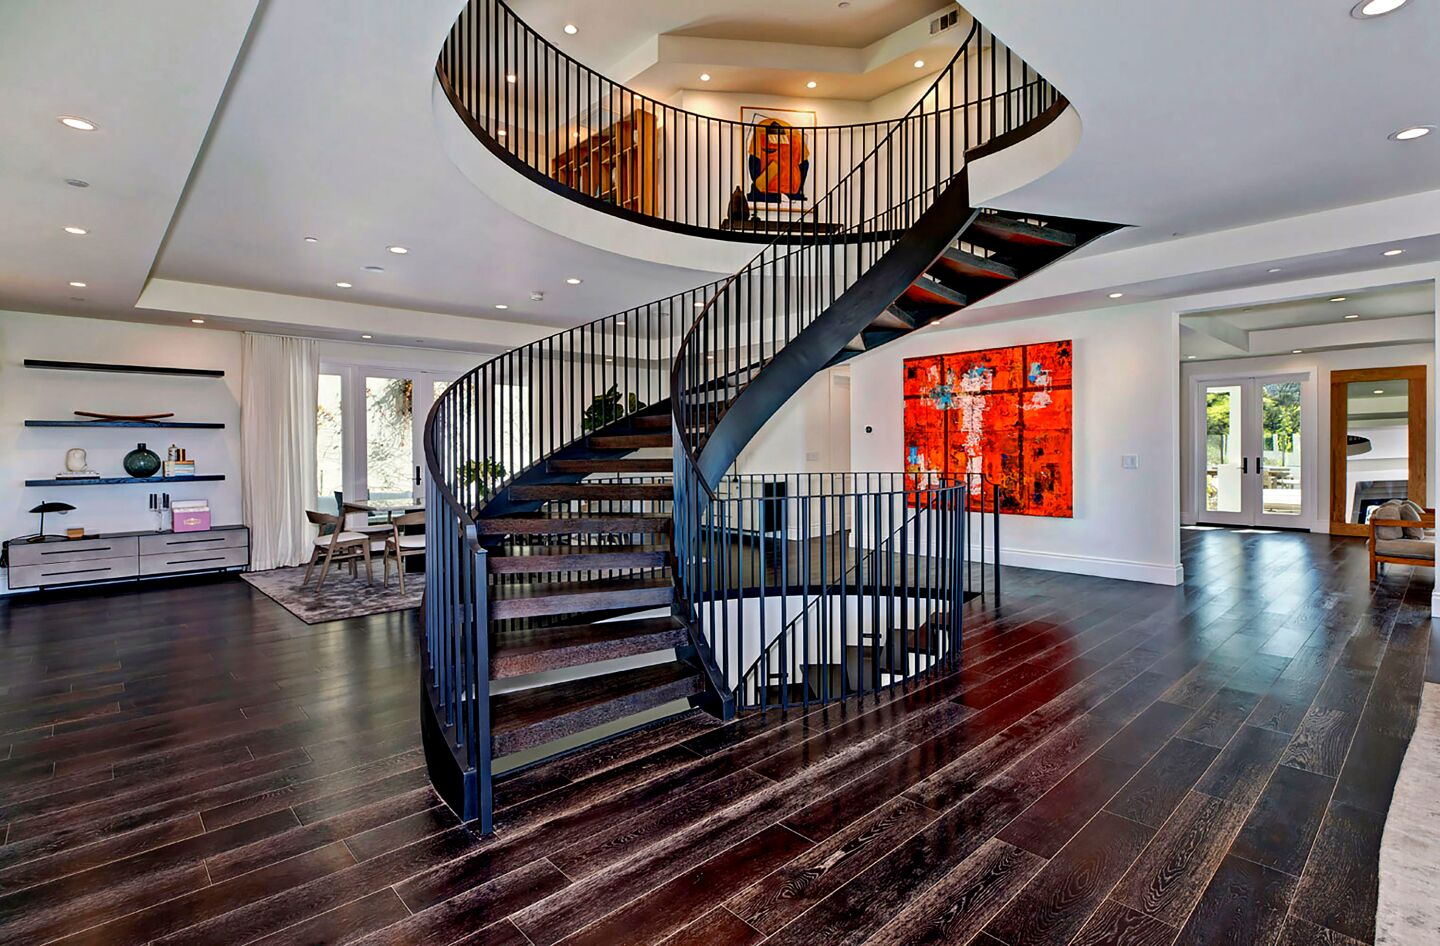 Wade and Union's three-story villa is navigated by a sculptural staircase that runs through the heart of the home.